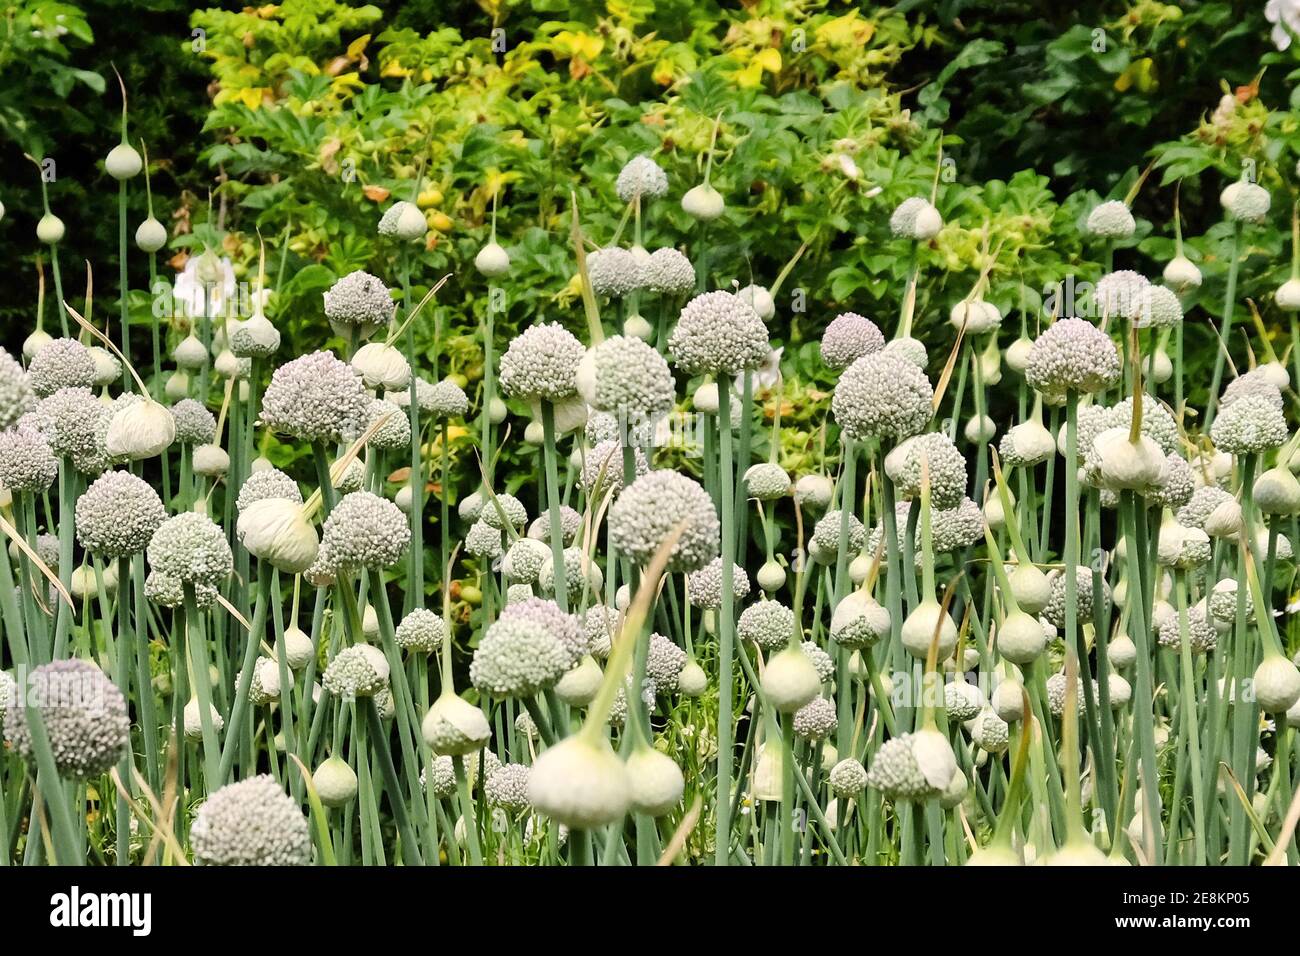 Allium 'ping pong' in flower during the summer Stock Photo - Alamy